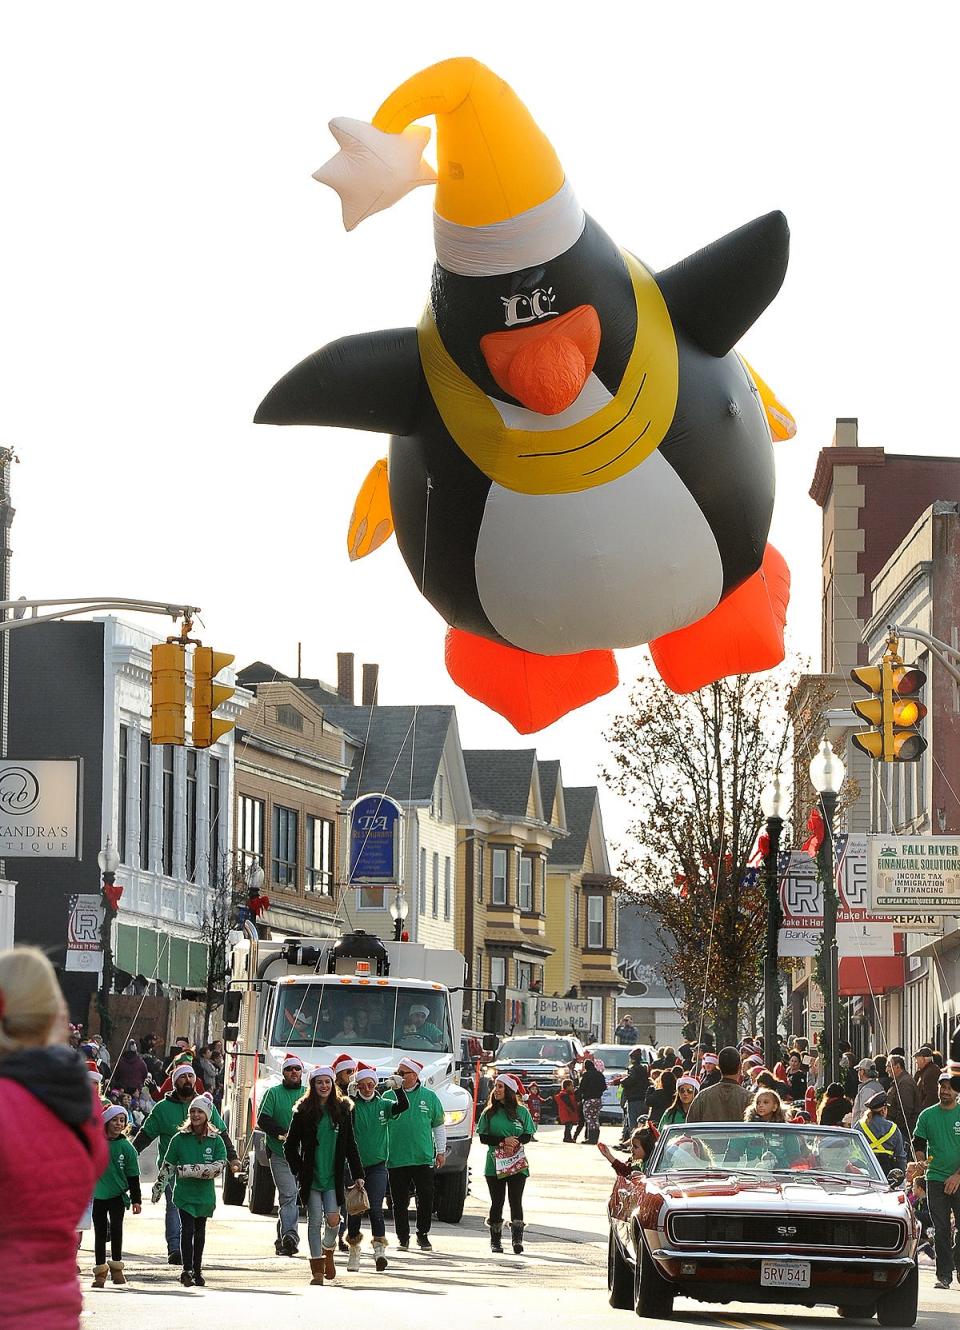 "Peter Penguin" flies up South Main Street, piloted by a group from Liberty Utilities,during the Fall River Children's Holiday Parade, Saturday, December 1, 2018, in Fall River, Massachusetts.